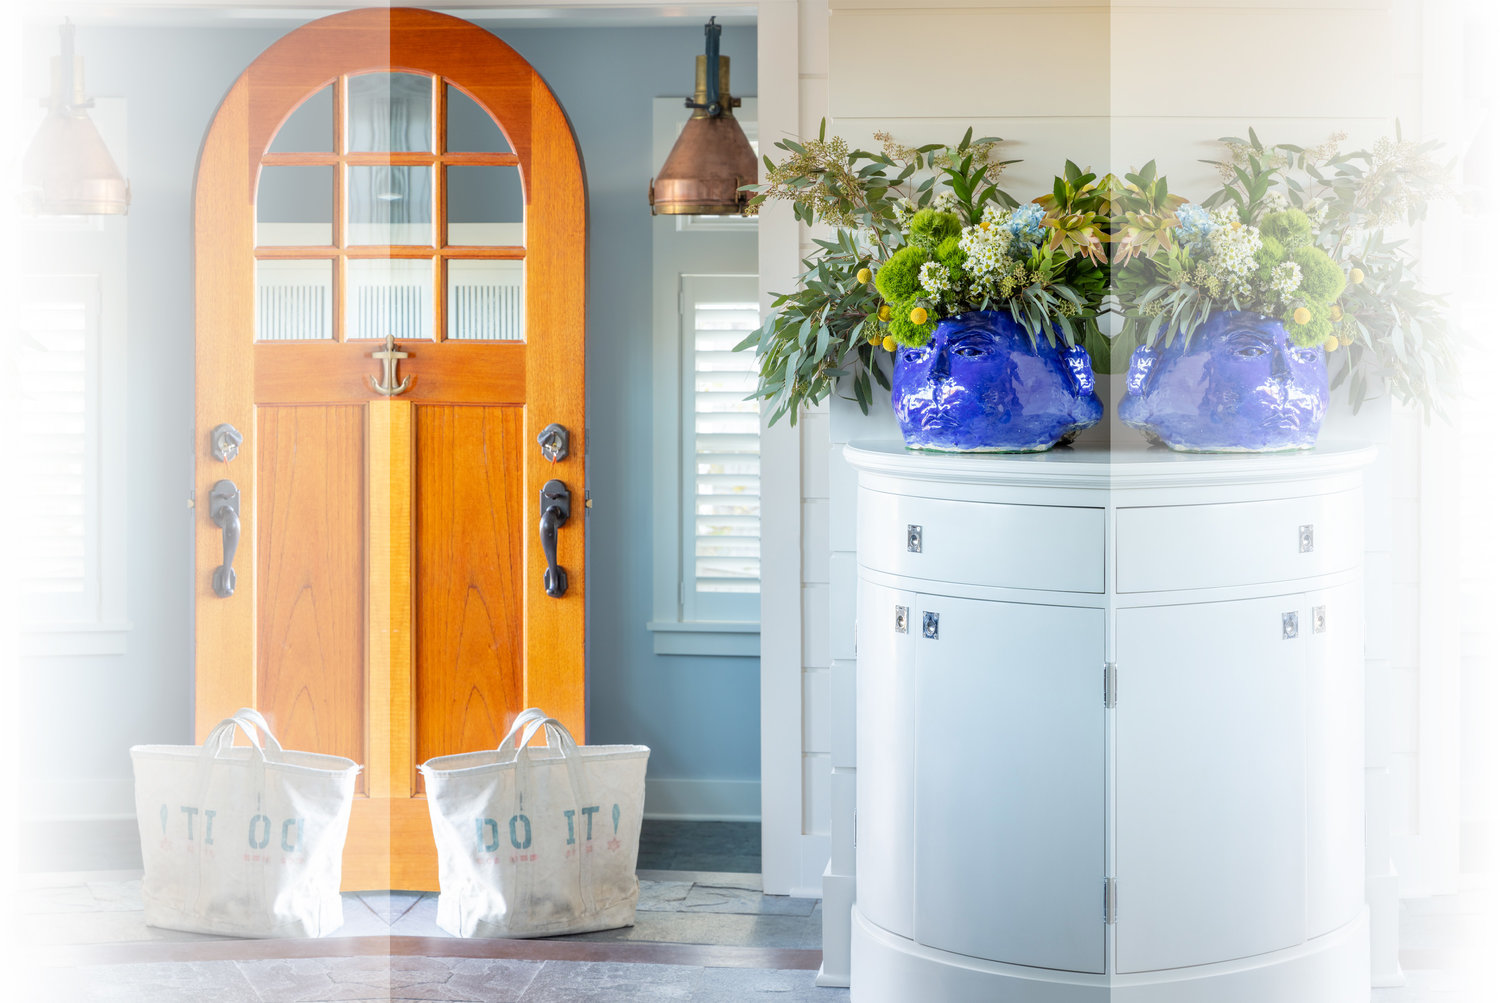 The arch top door adds charm and shape